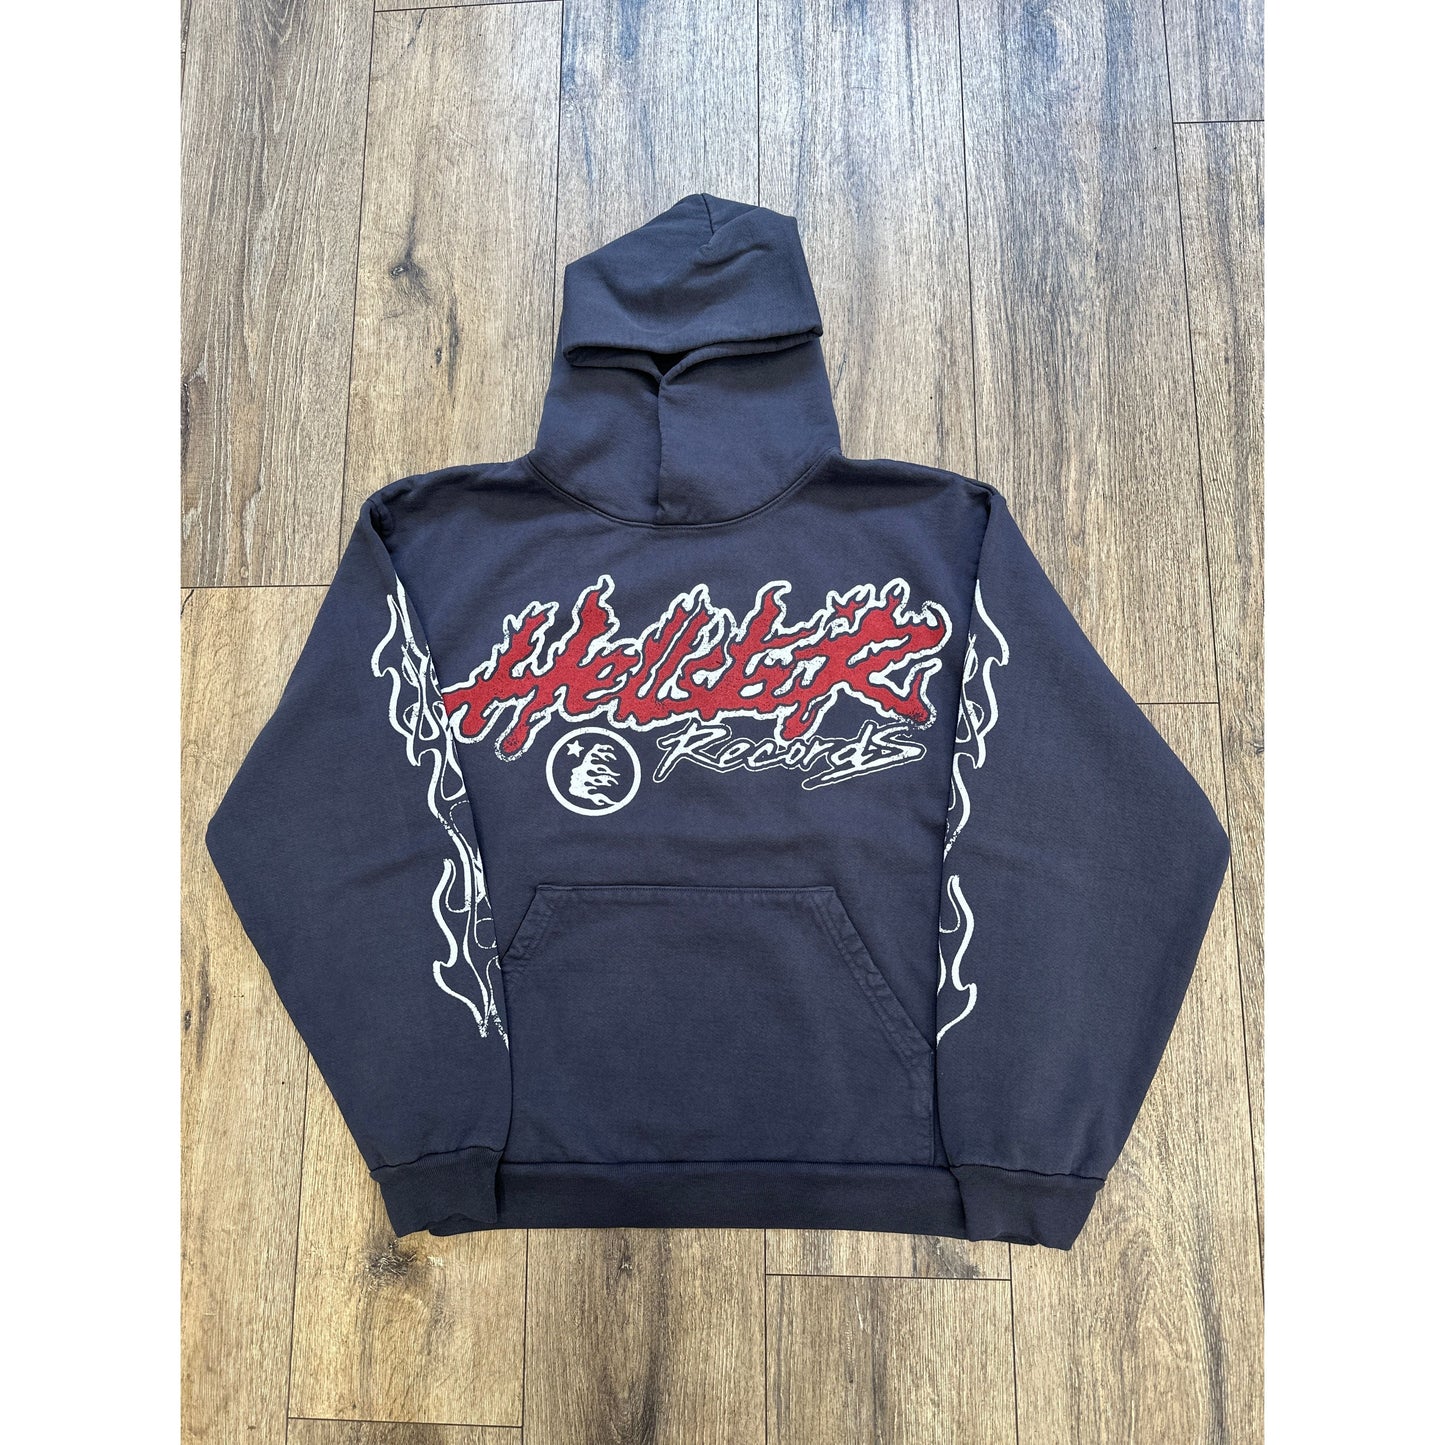 Hellstar Records Hoodie Washed Black by Hellstar from £275.00